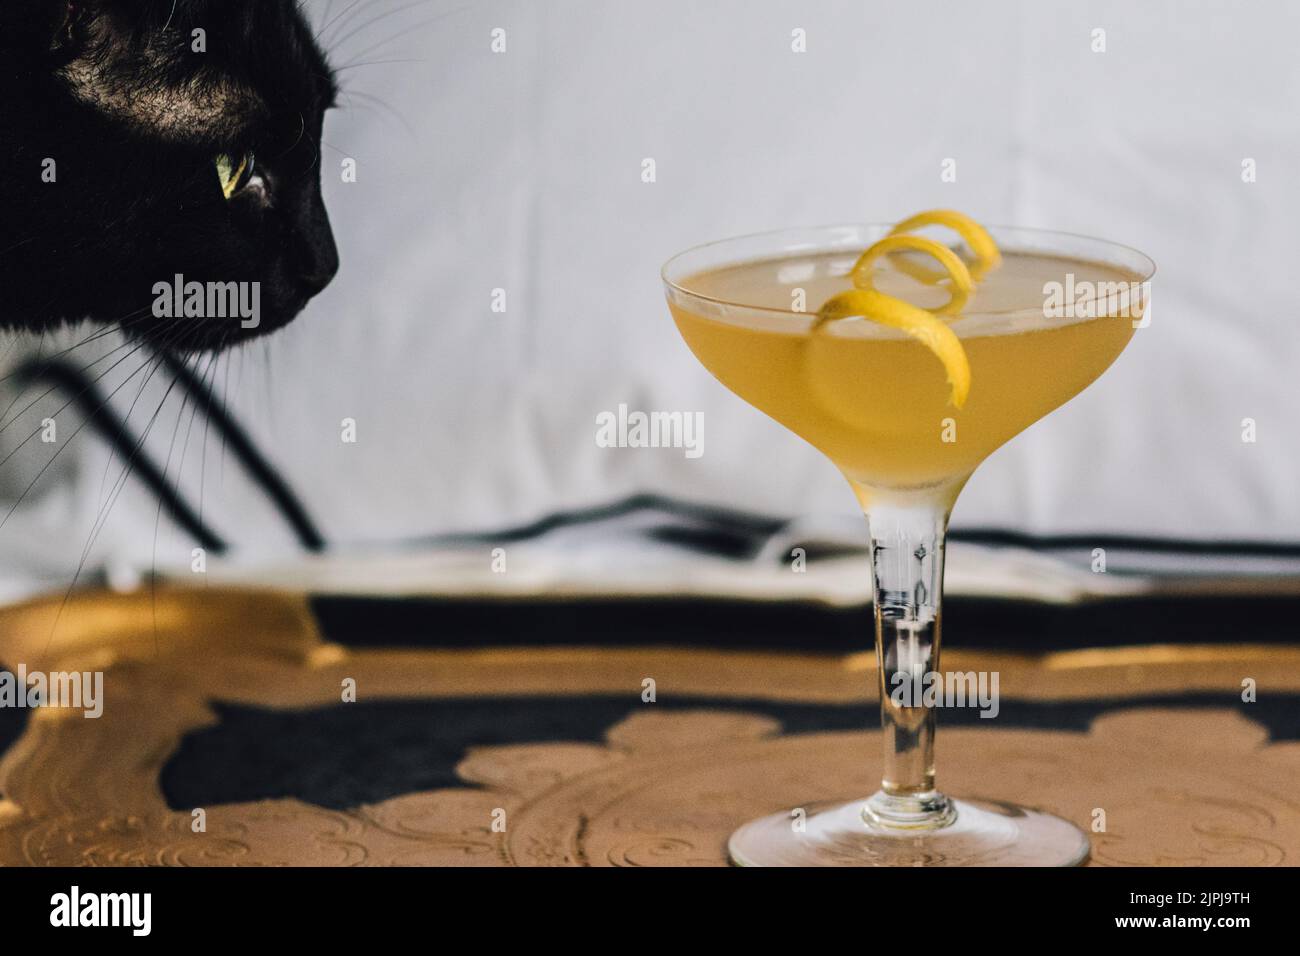 black cat with green eyes looking at yellow lemon cocktail on gold and black tray with white Stock Photo